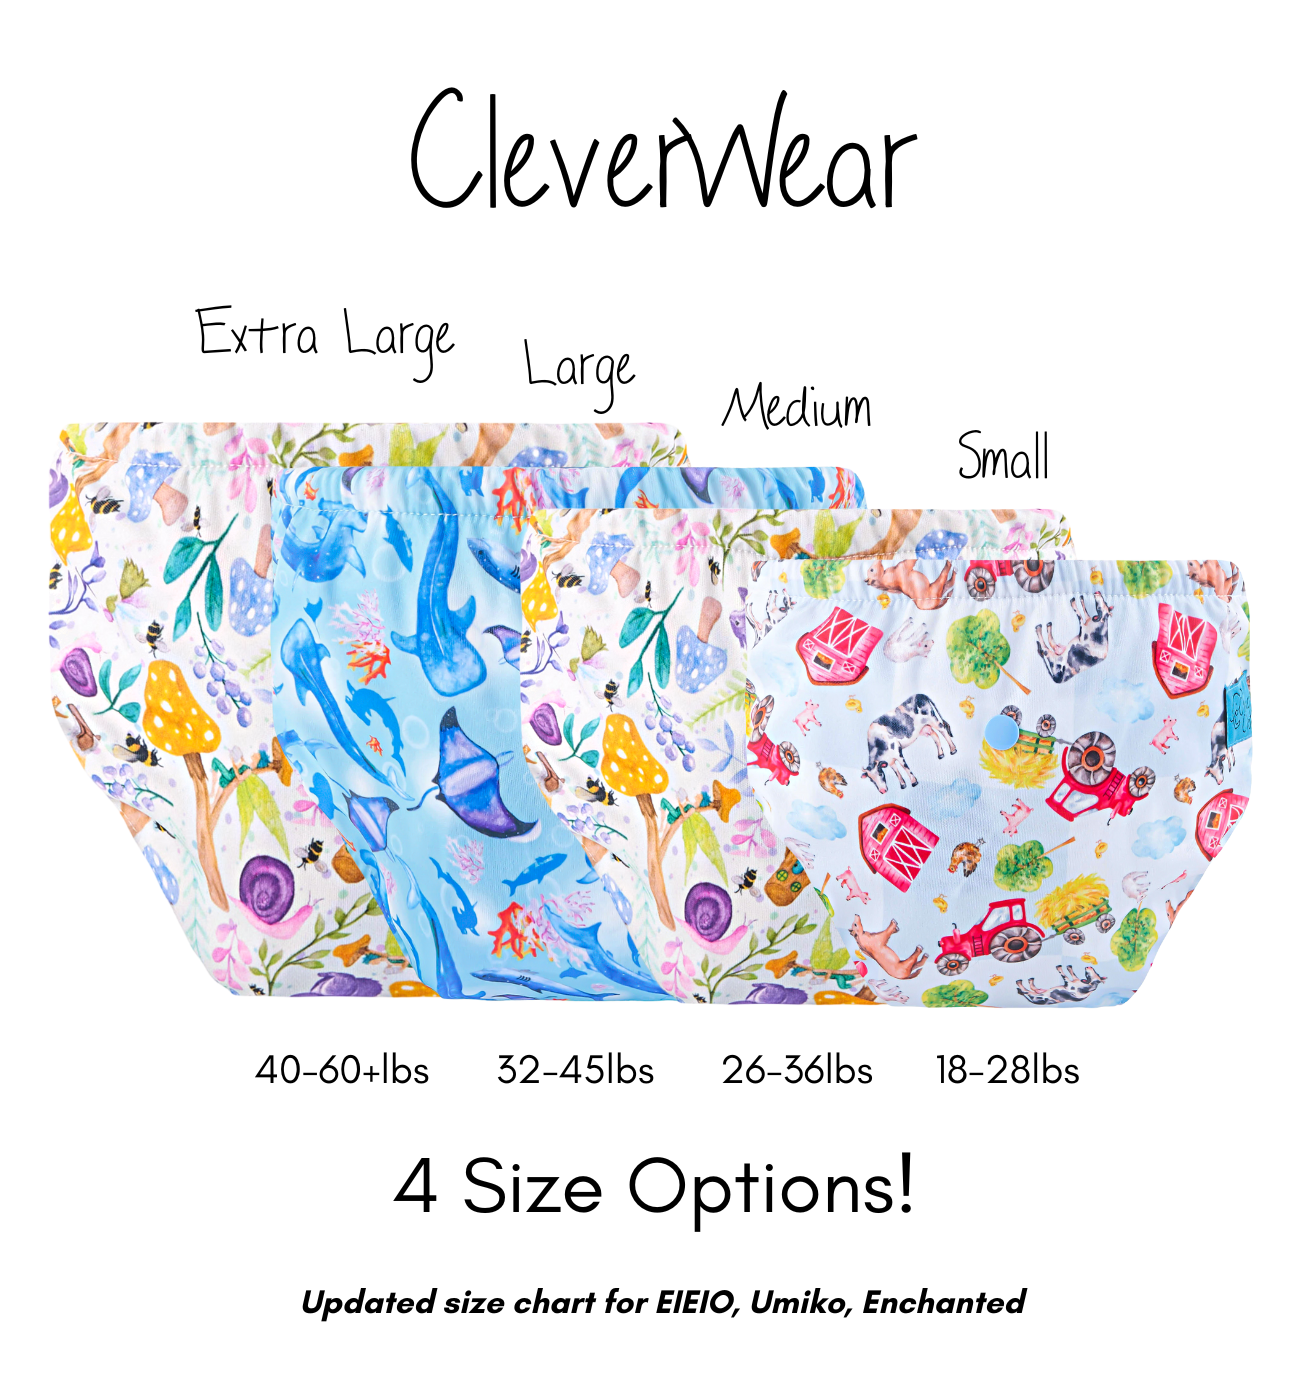 CleverWear Trainers